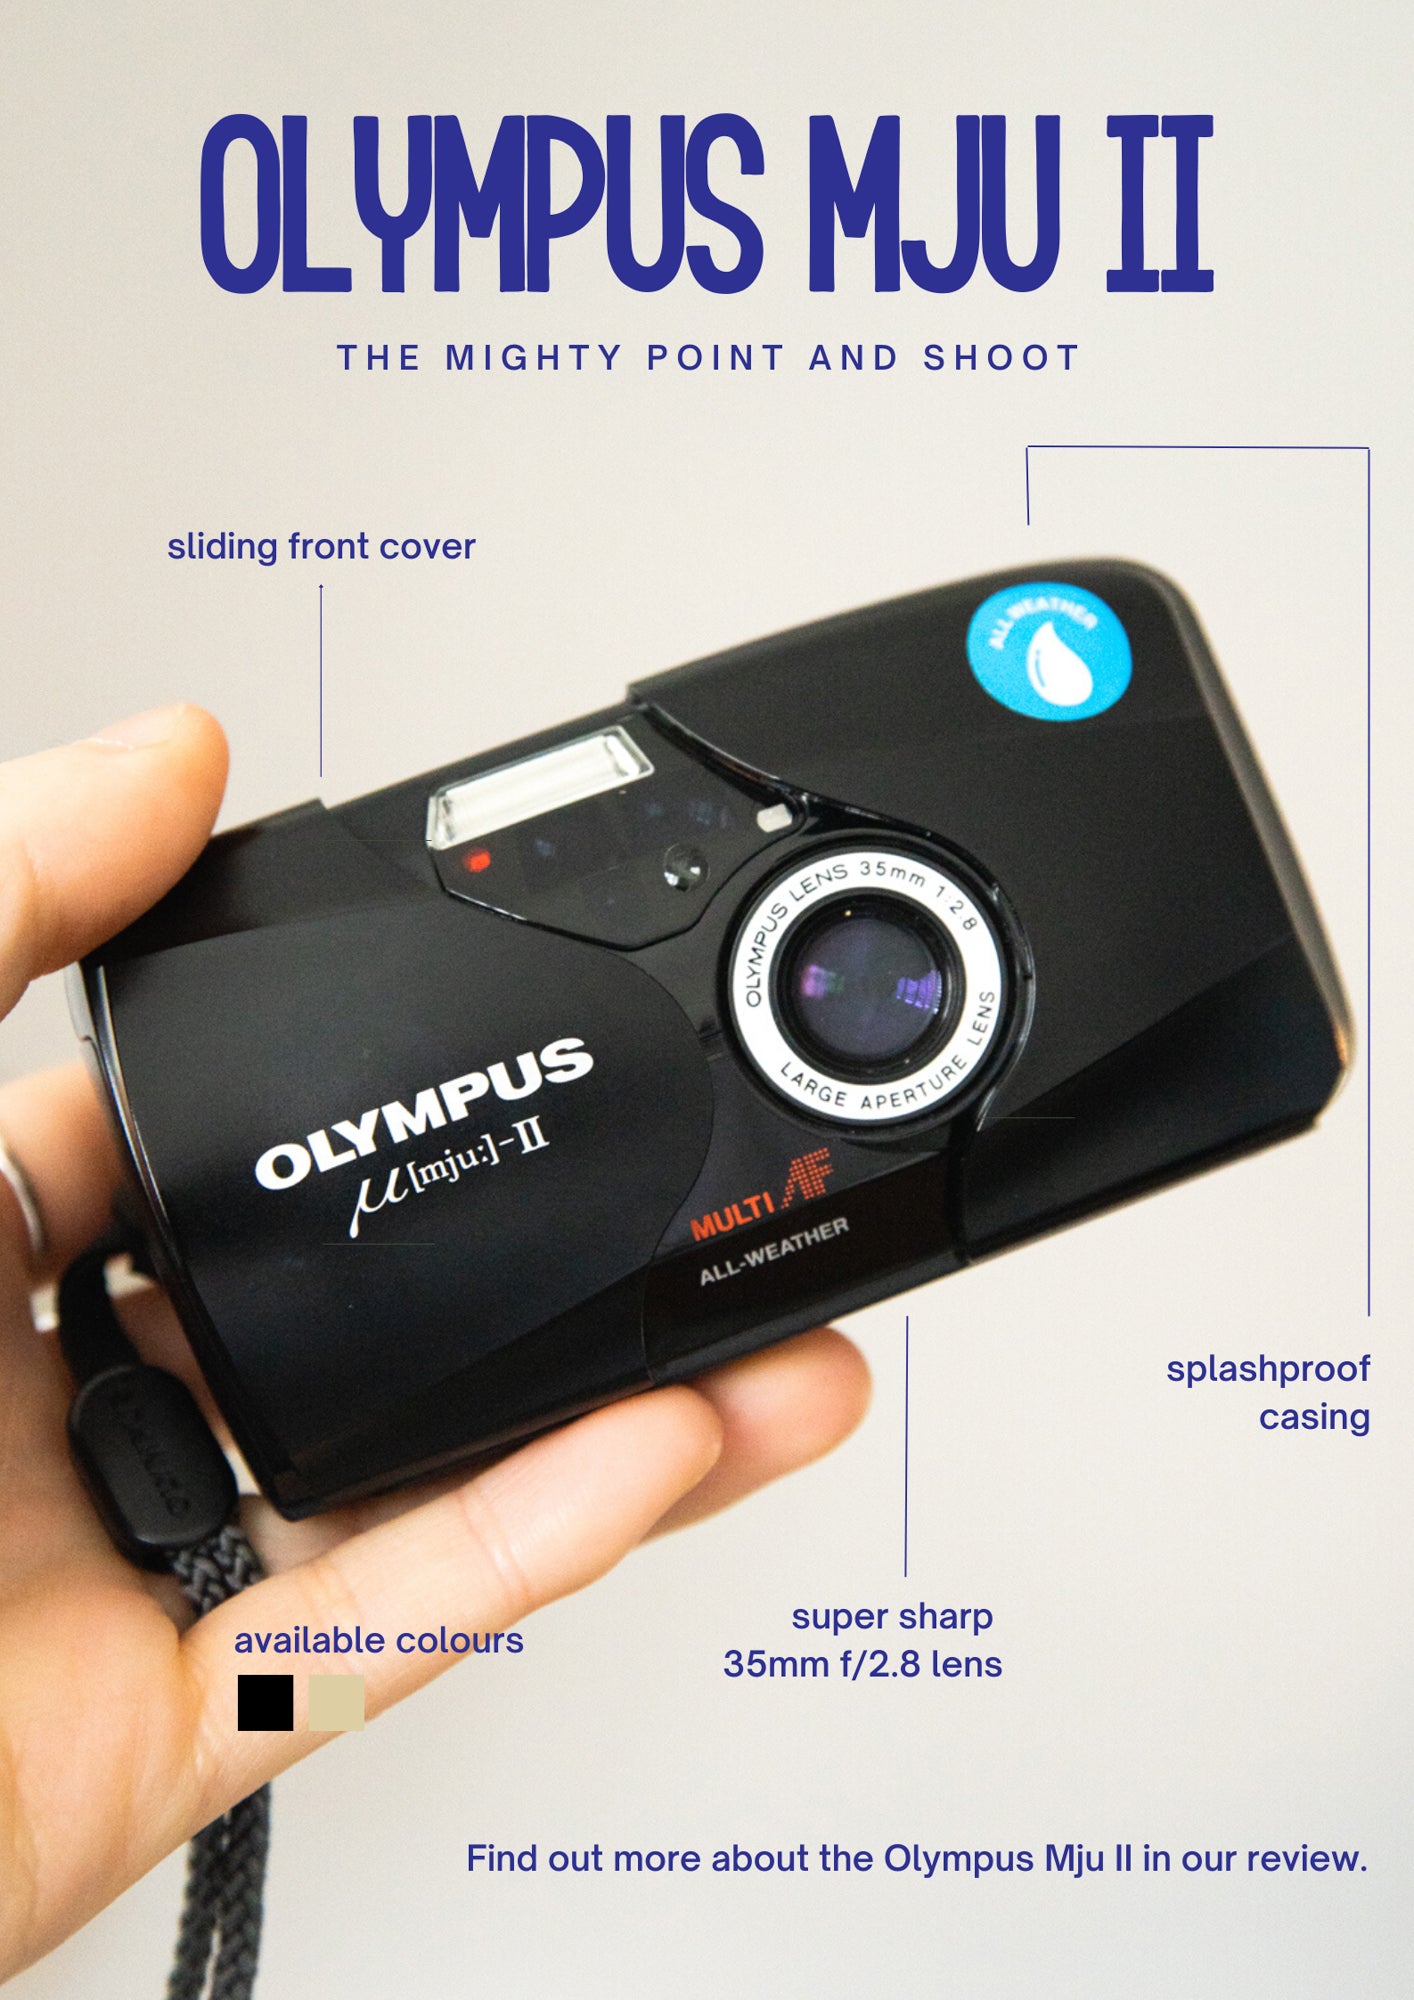 Camera Review: The Olympus Mju II - Everything You Need To Know